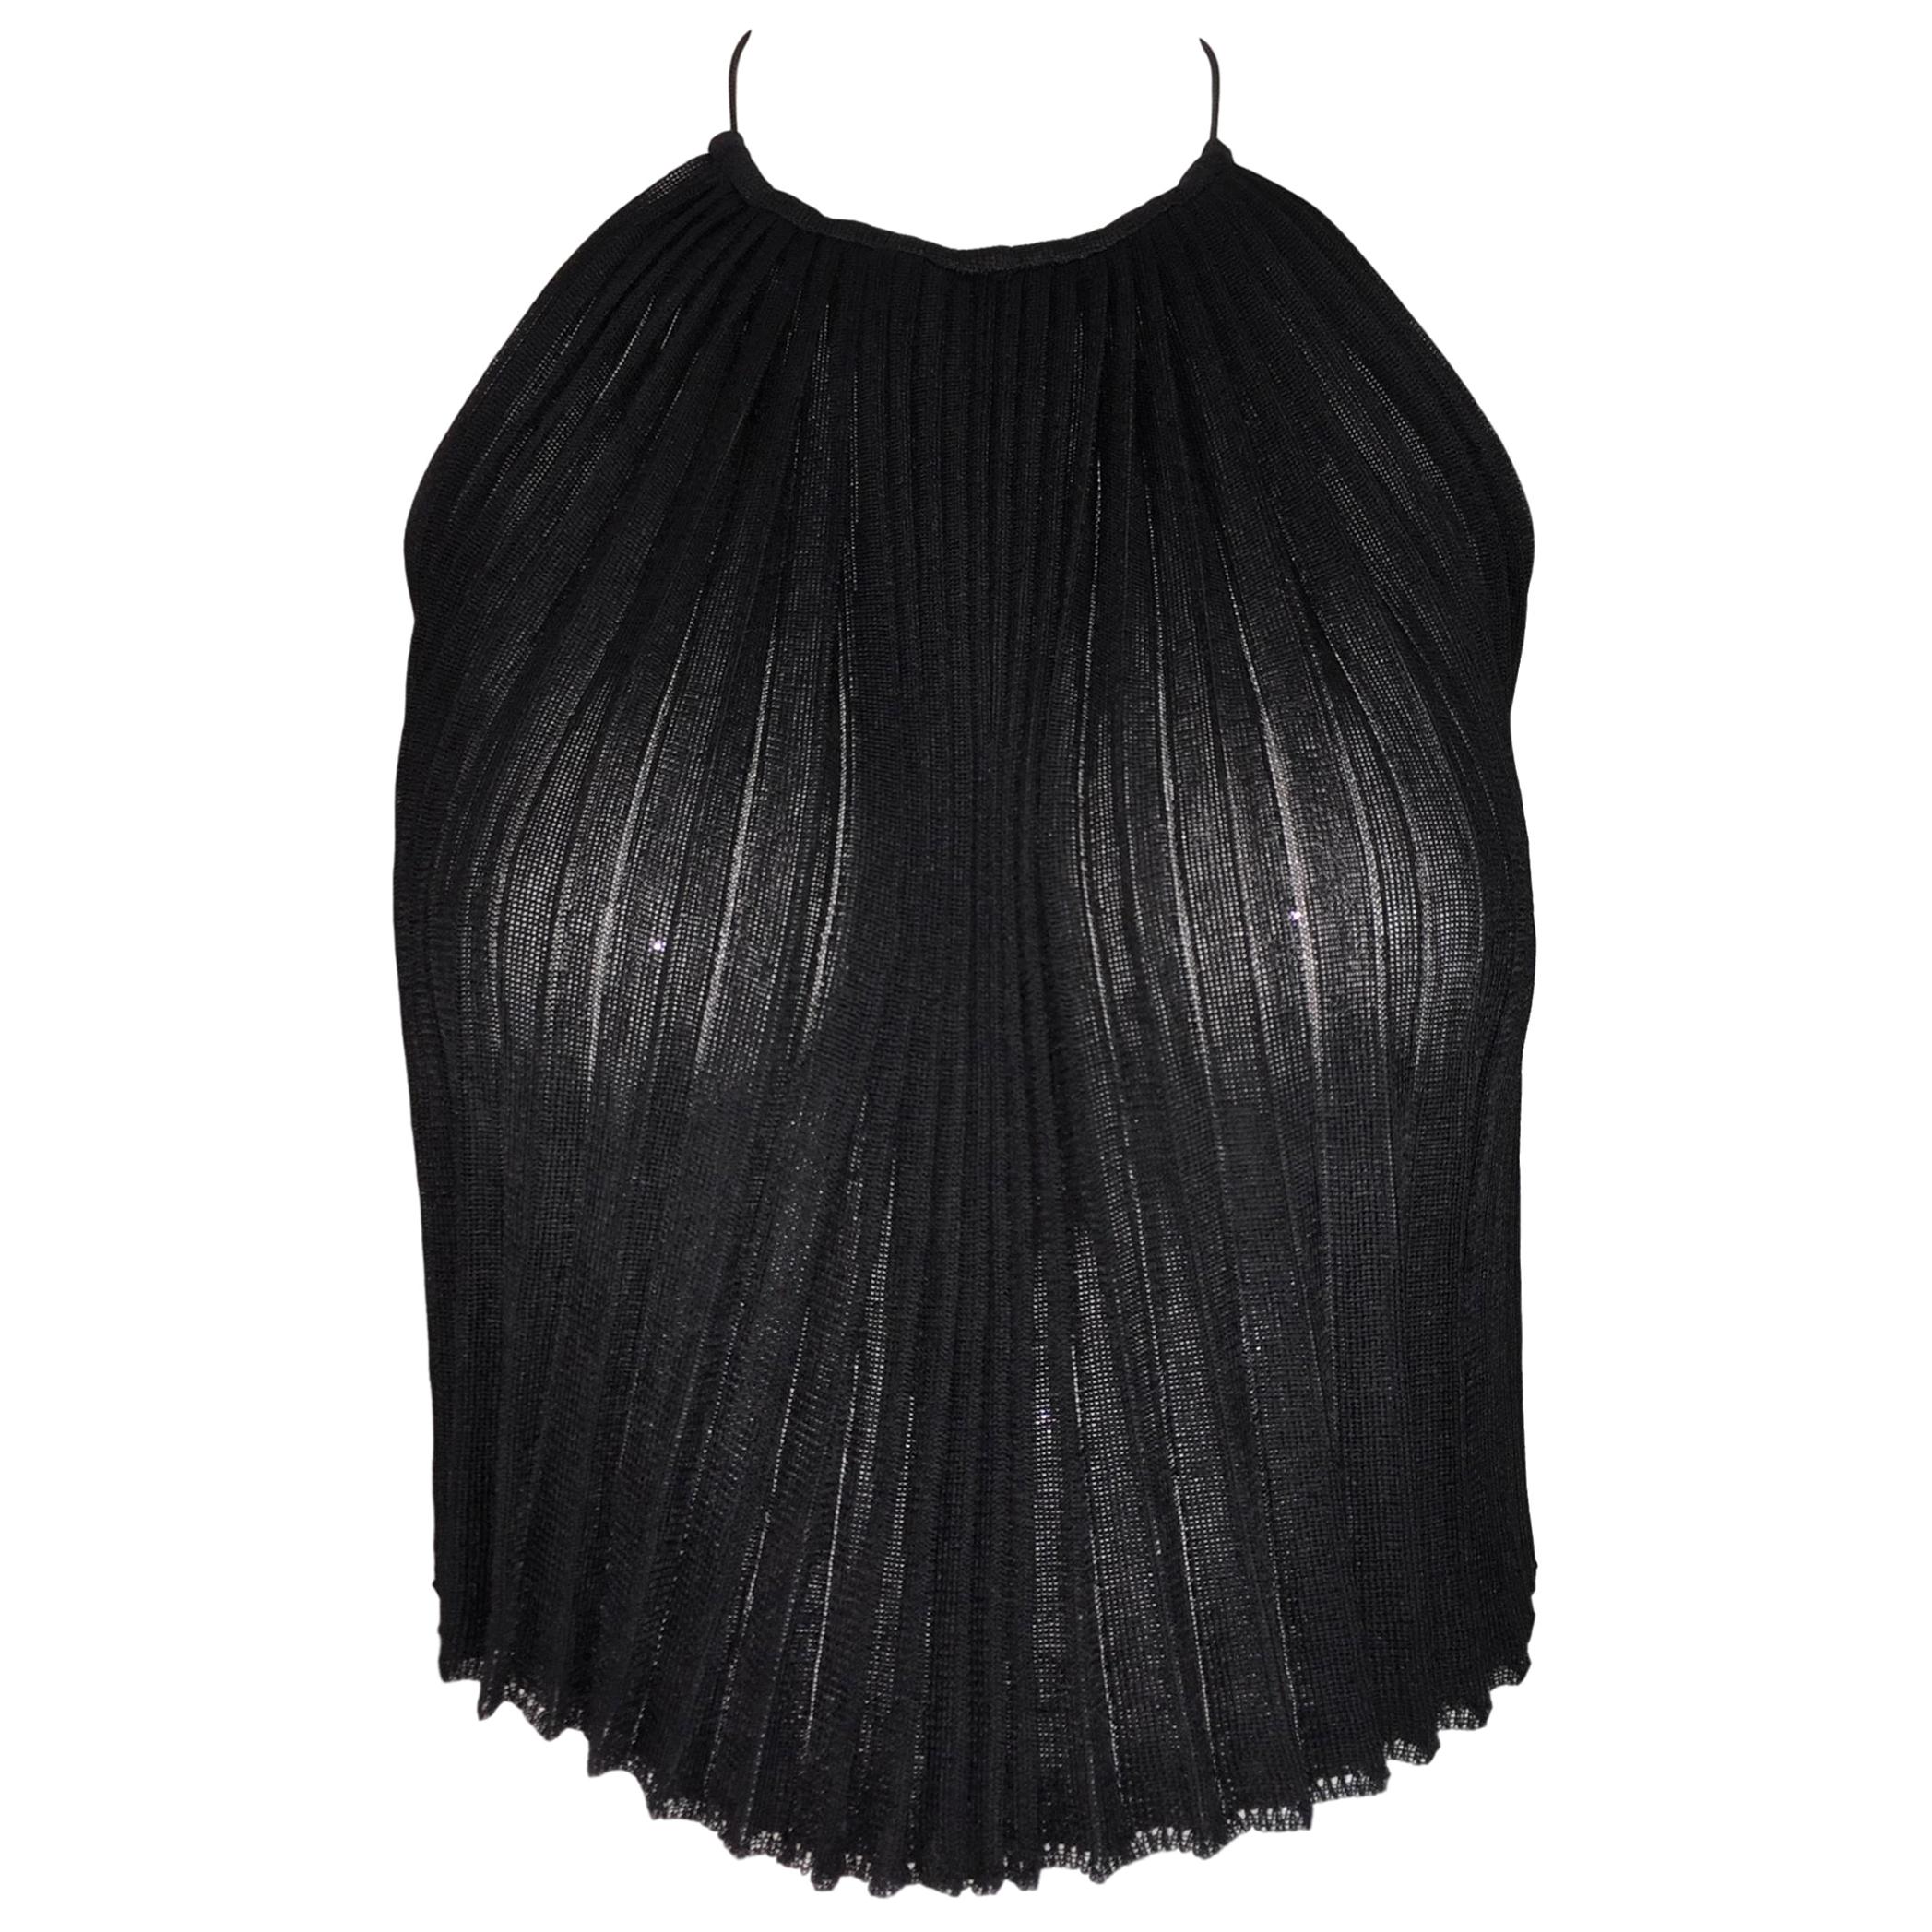 S/S 2000 Gucci by Tom Ford Sheer Black Knit Crop Top Backless Chain Straps